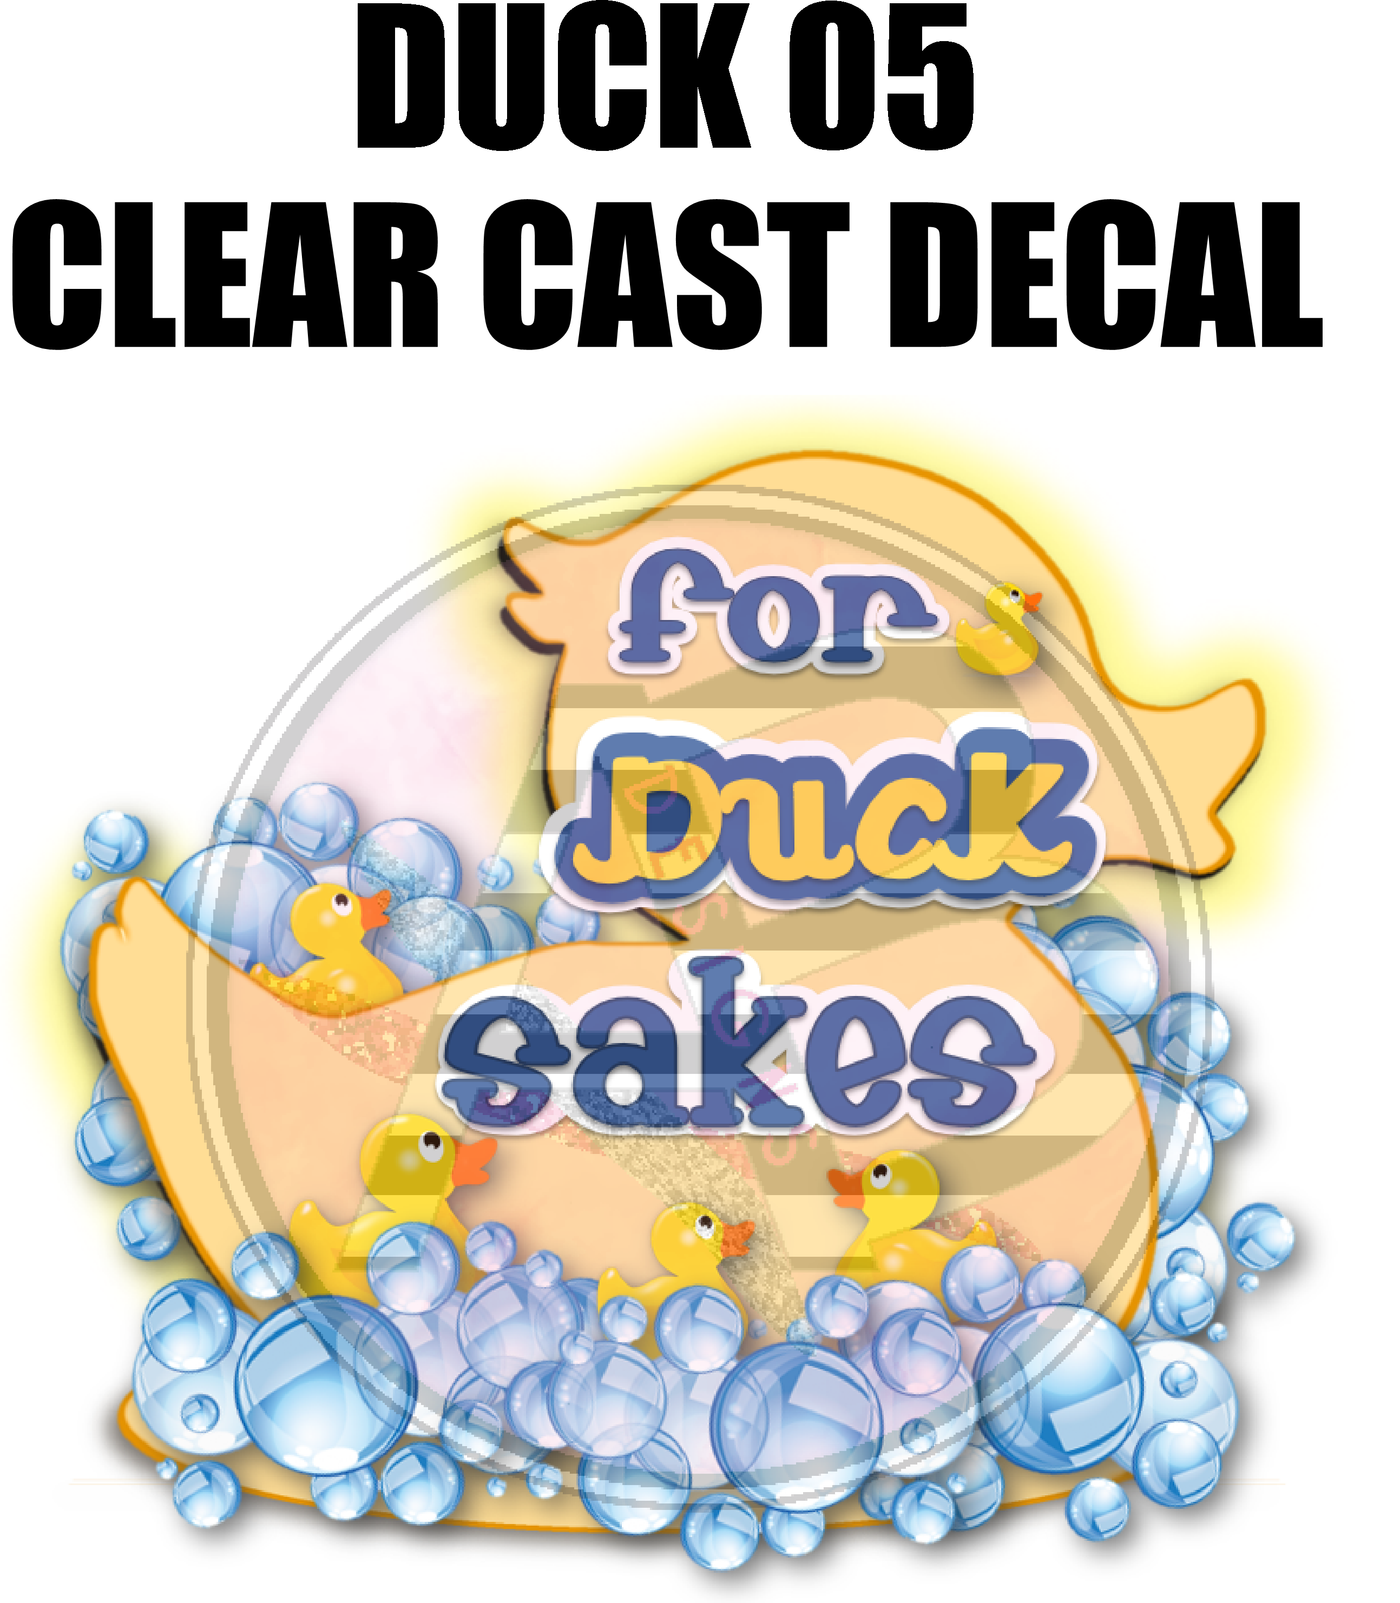 Duck 05 - Clear Cast Decal